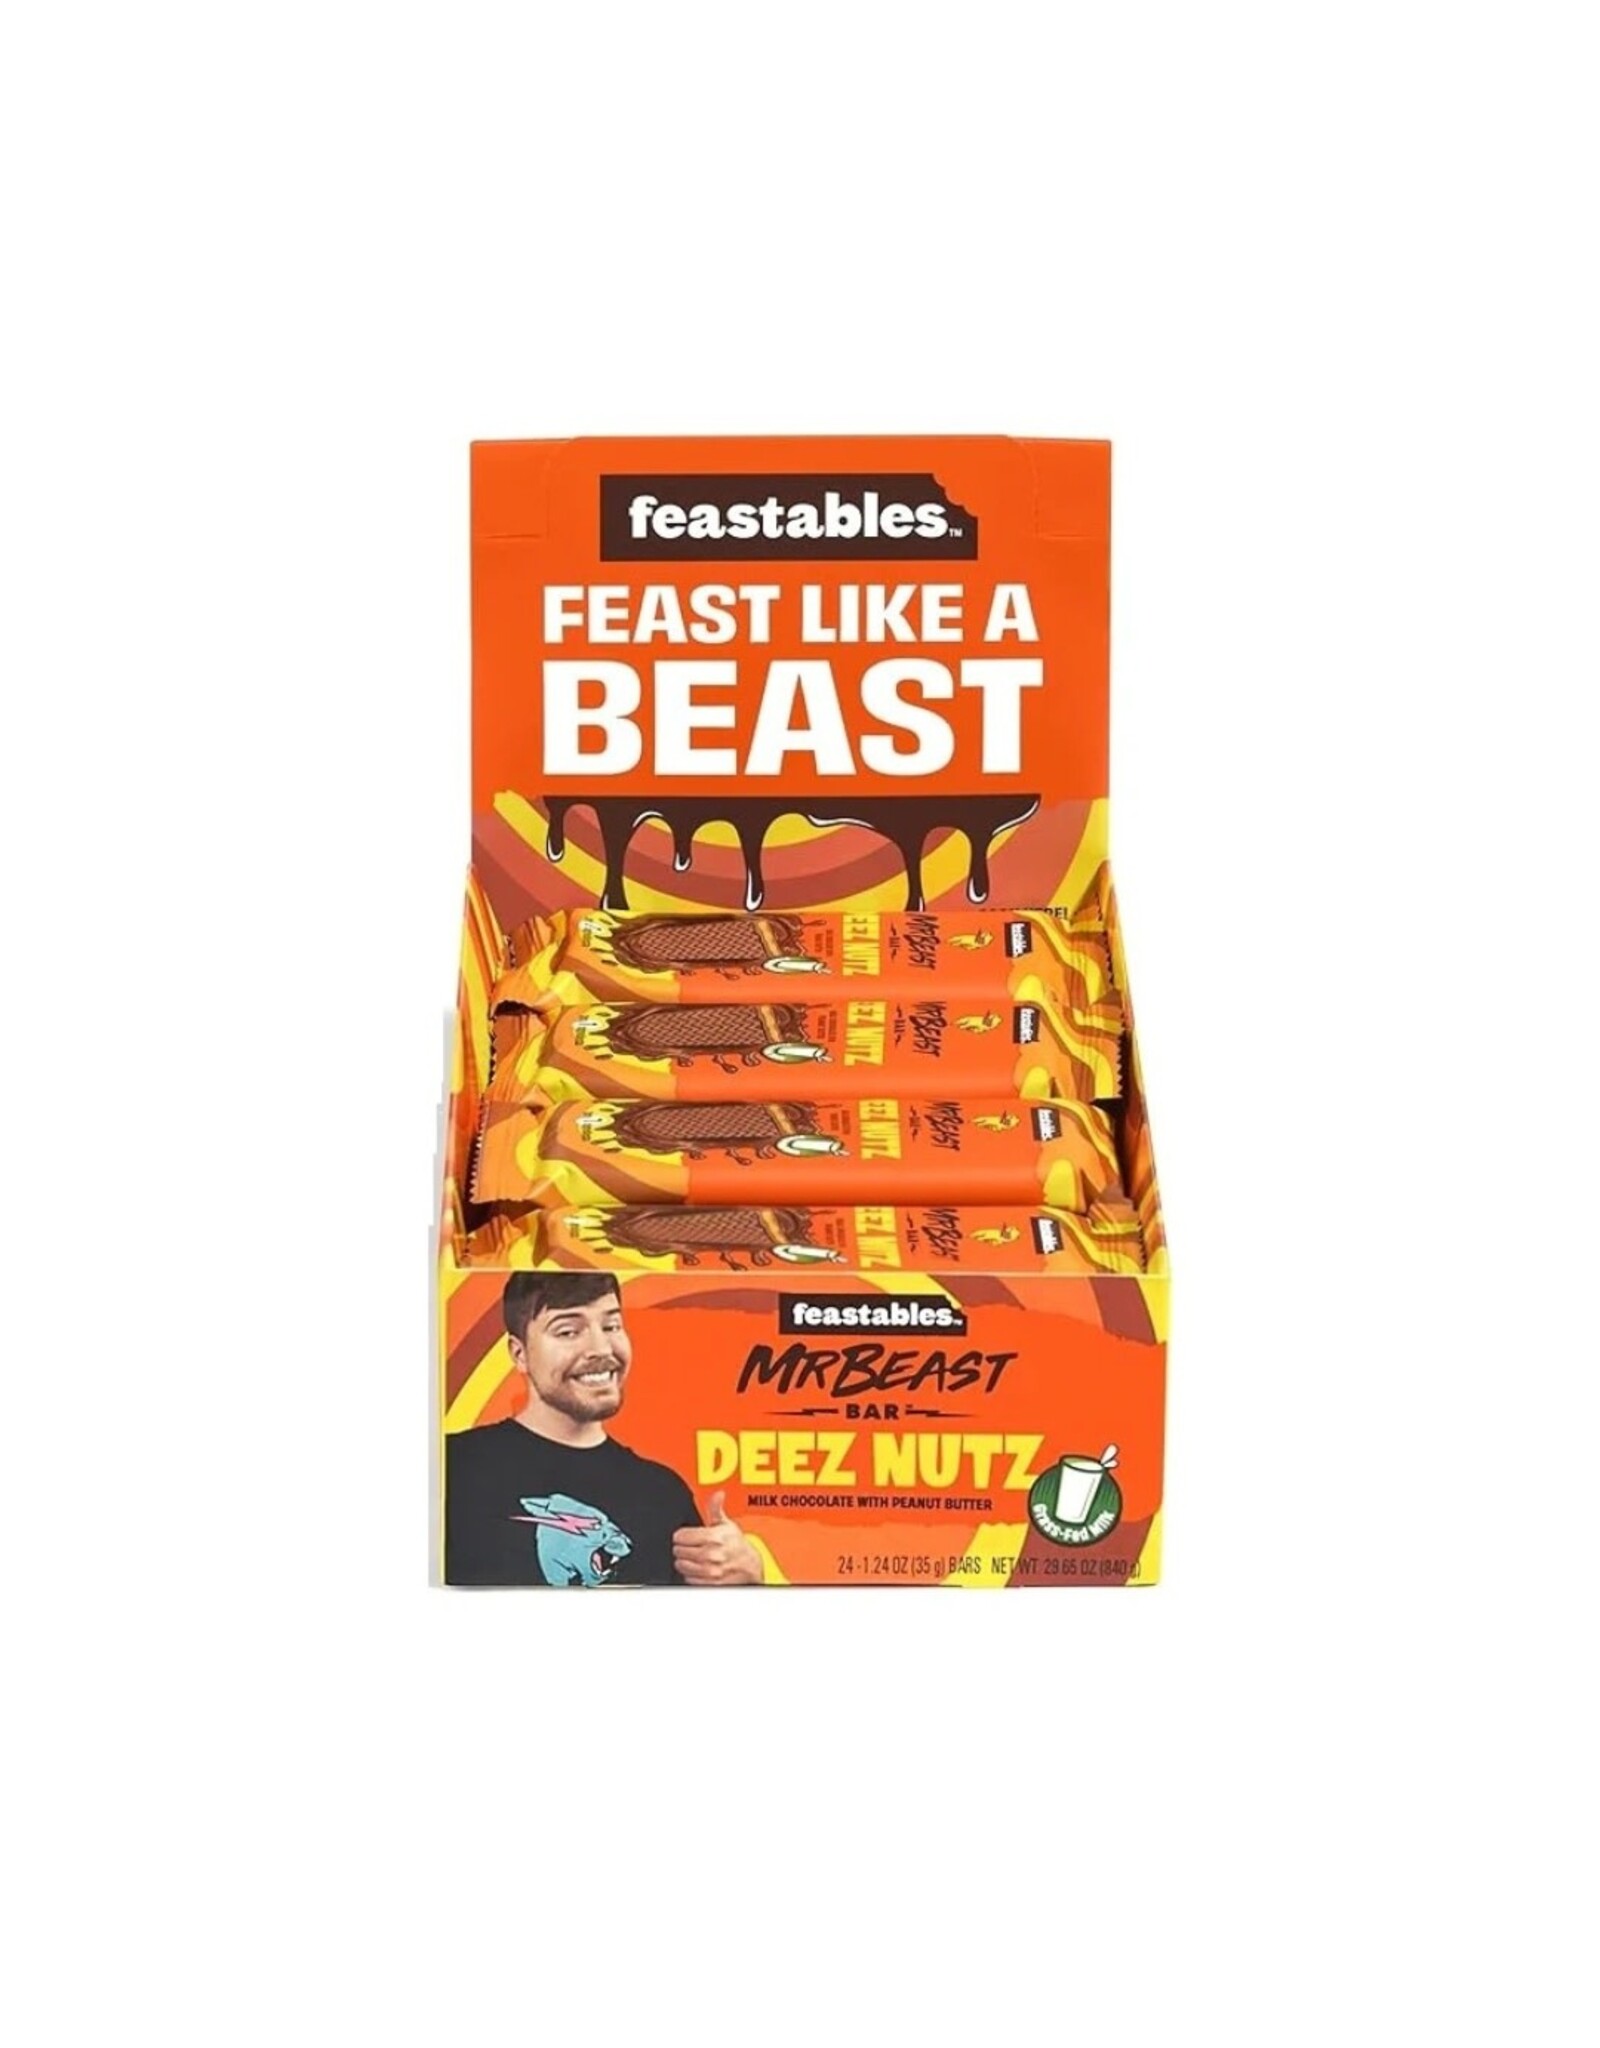 Mr Beast Feastables Chocolate Bar - Deez Nuts Milk Chocolate With Peanut Butter - 35g